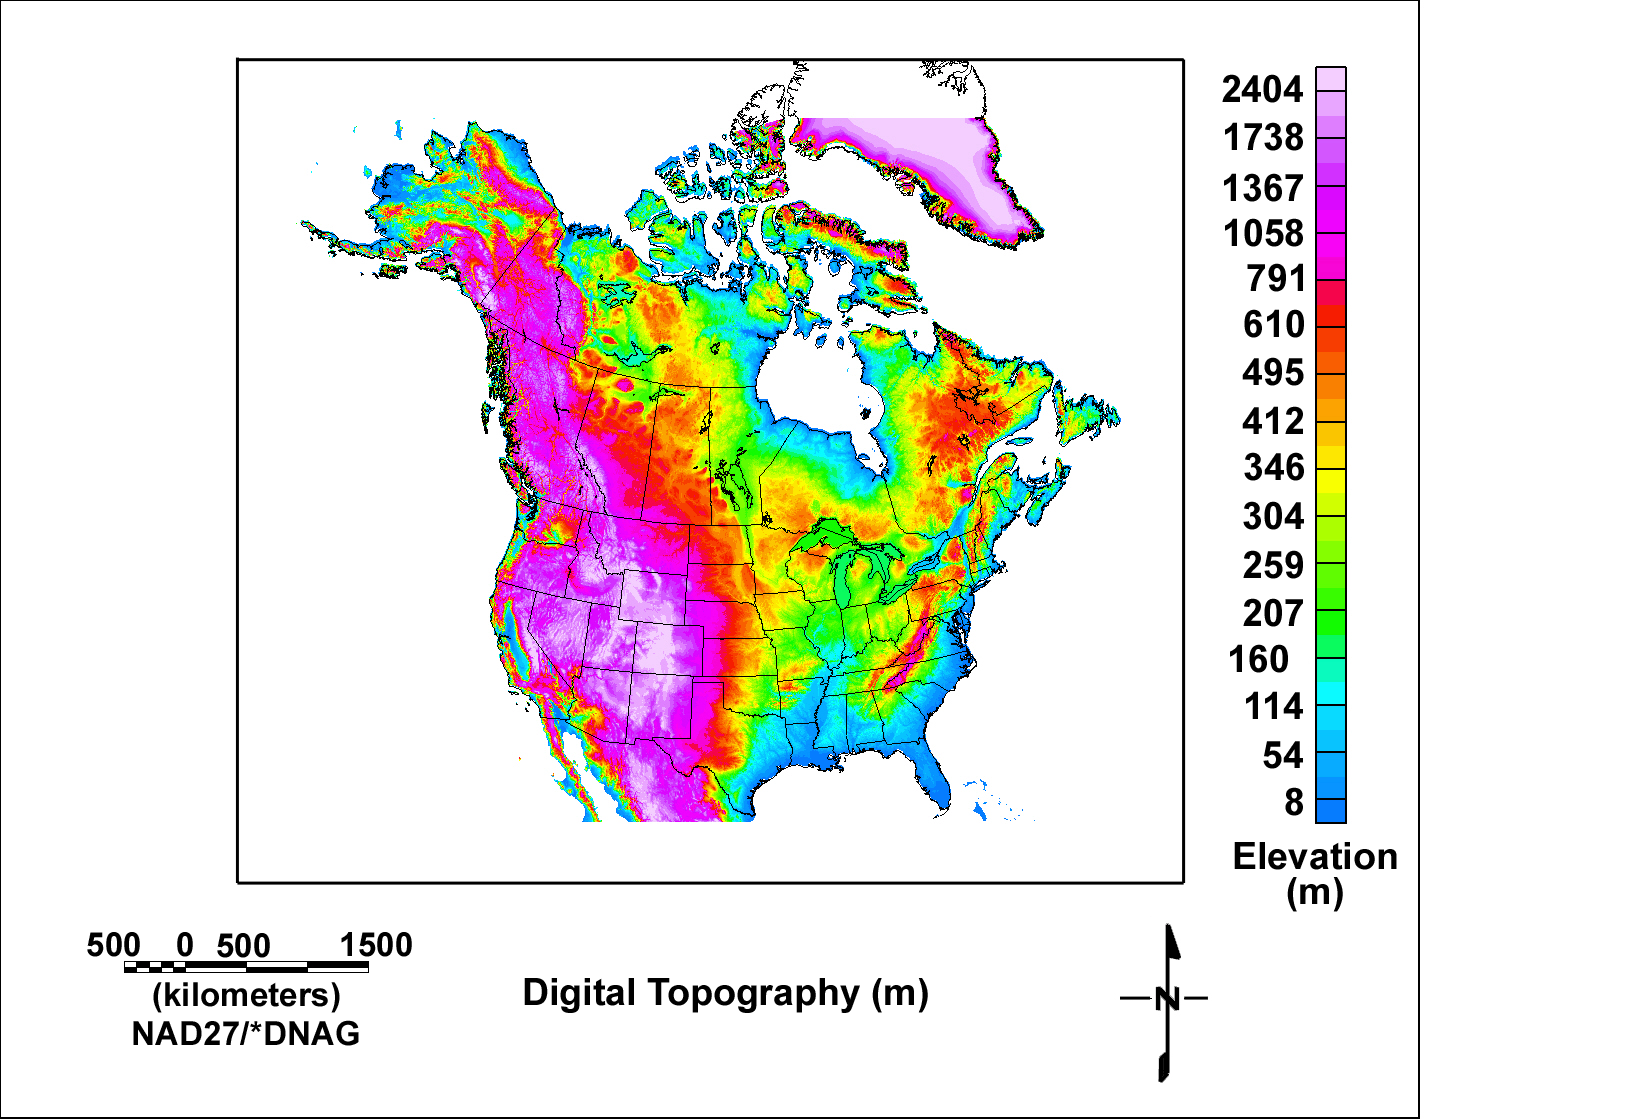 Image showing the map of digital topography.